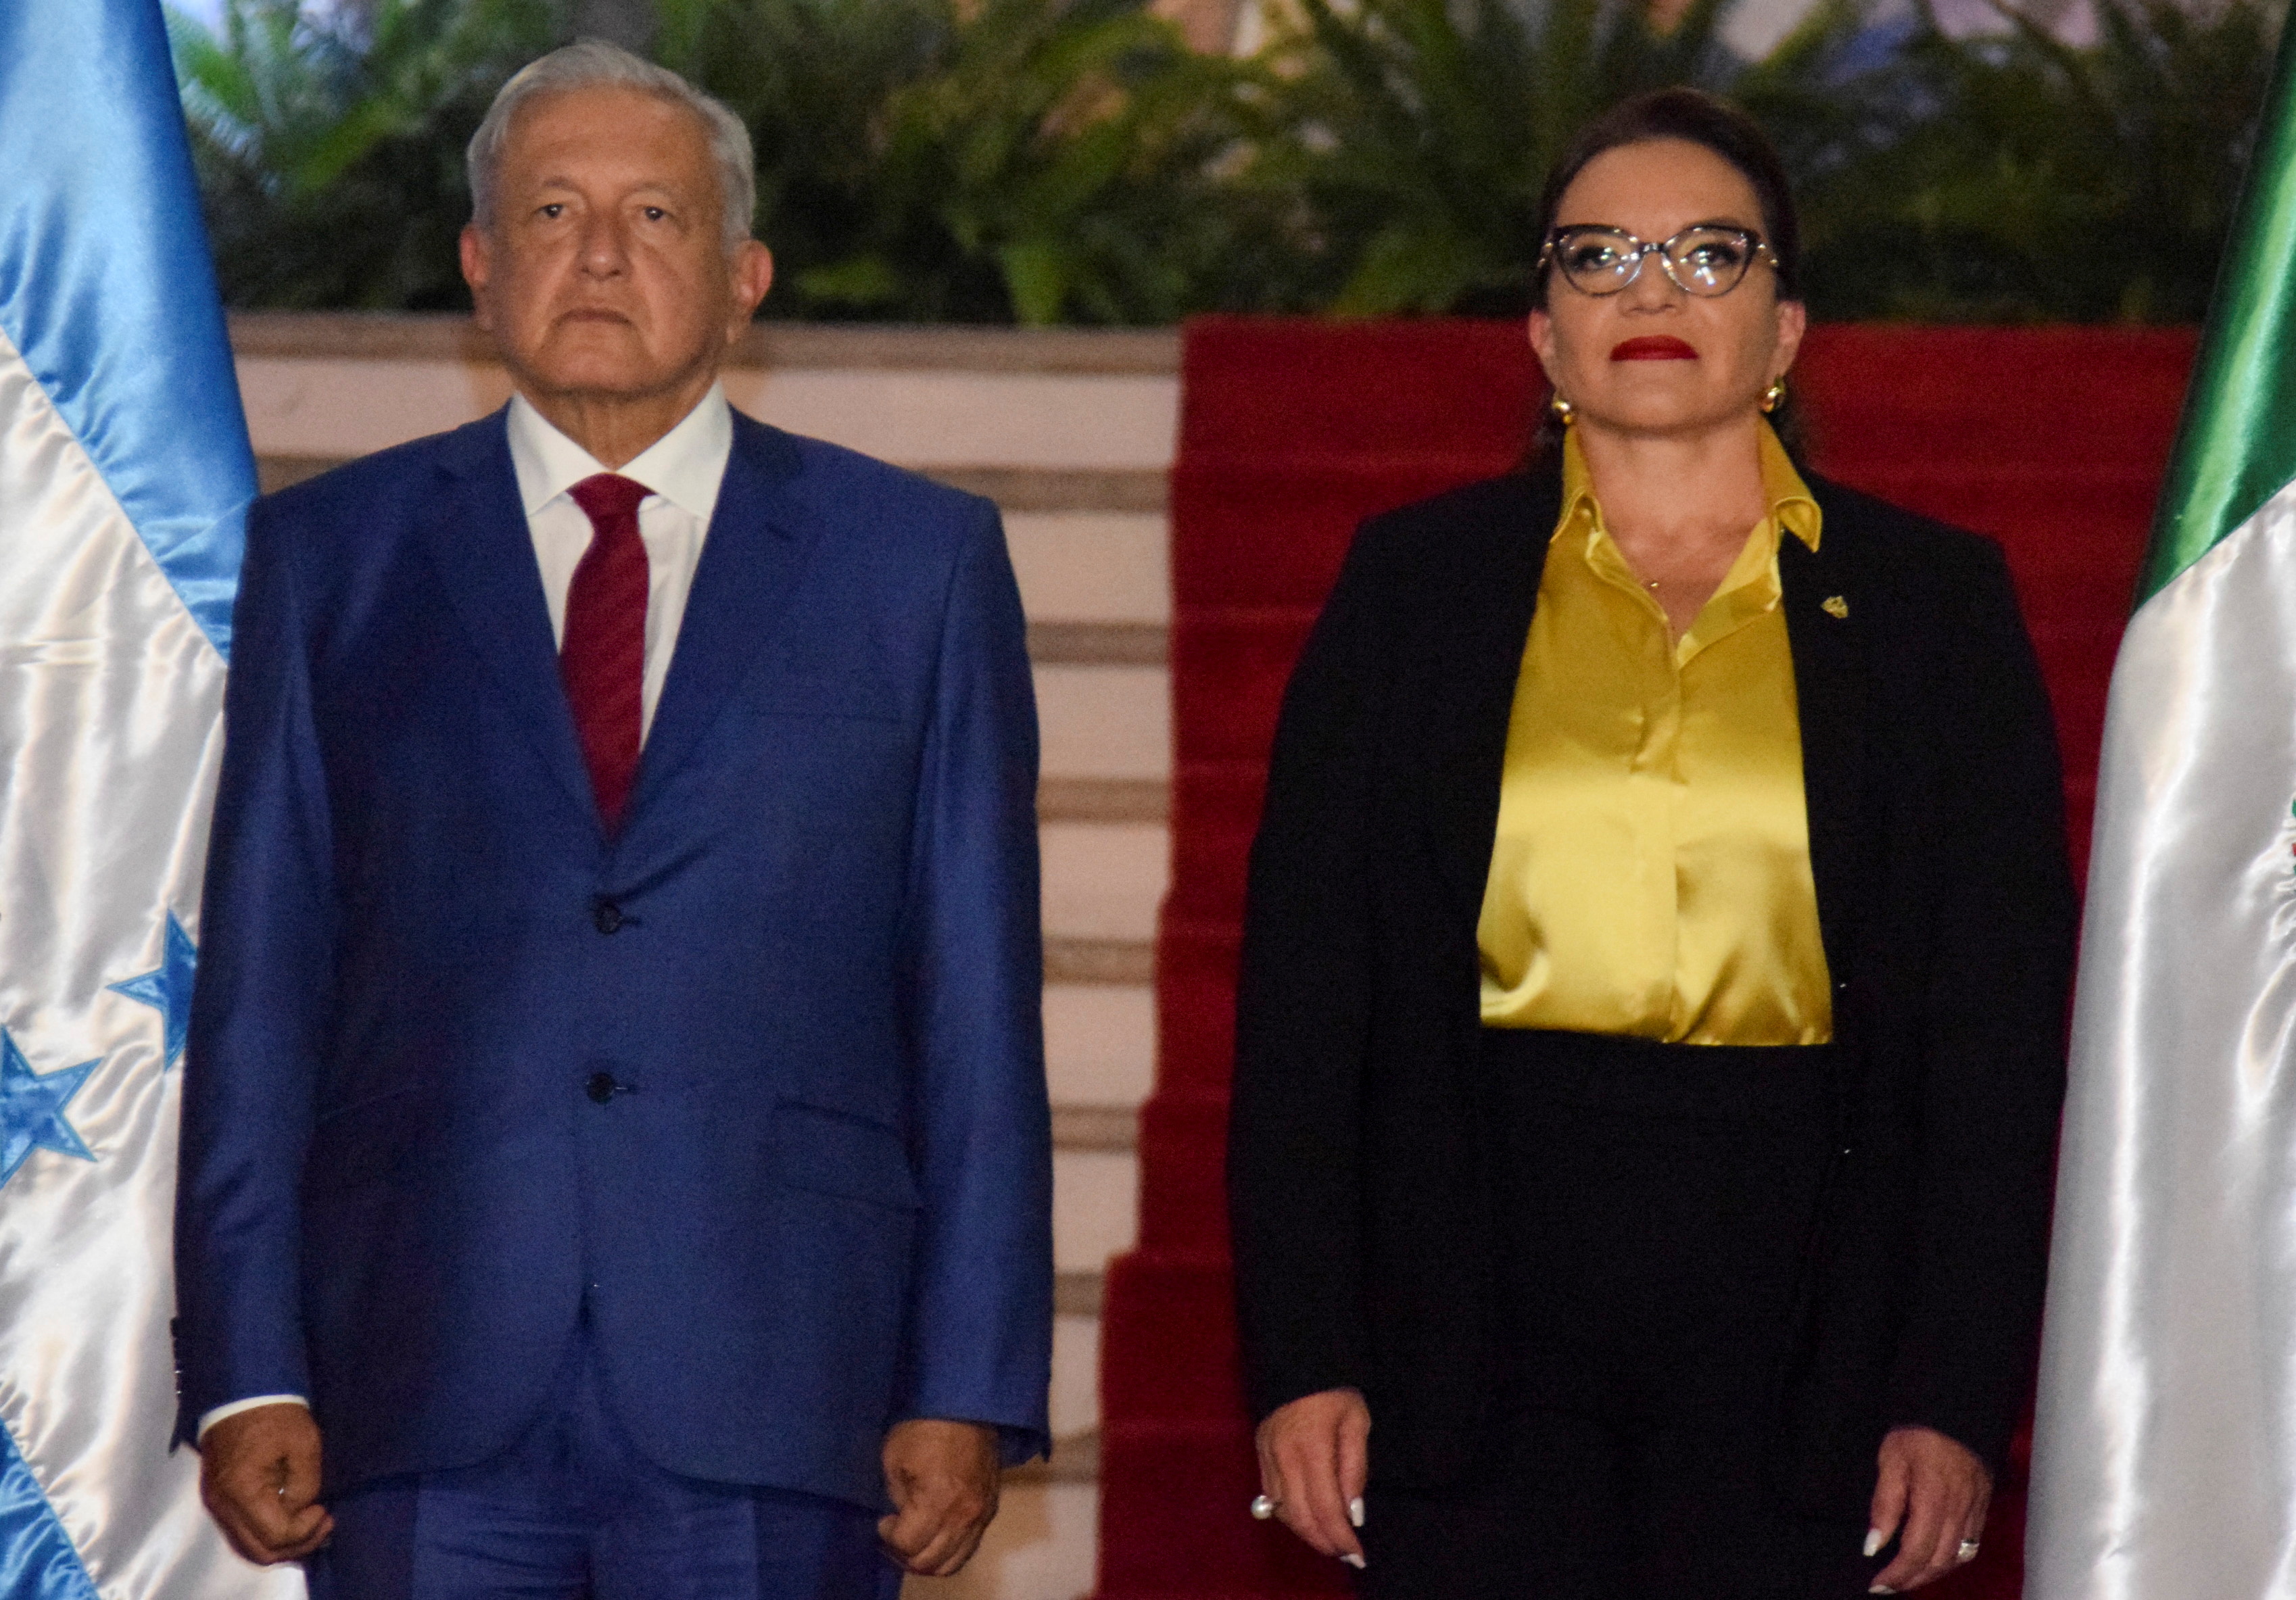 Mexico's President Andres Manuel Lopez Obrador stands next to Honduras President Xiomara Castro in a welcoming ceremony at the Presidential House, during Obrador's visit to Tegucigalpa, Honduras May 6, 2022. REUTERS/Henry Carbajal Zaldana NO RESALES. NO ARCHIVES